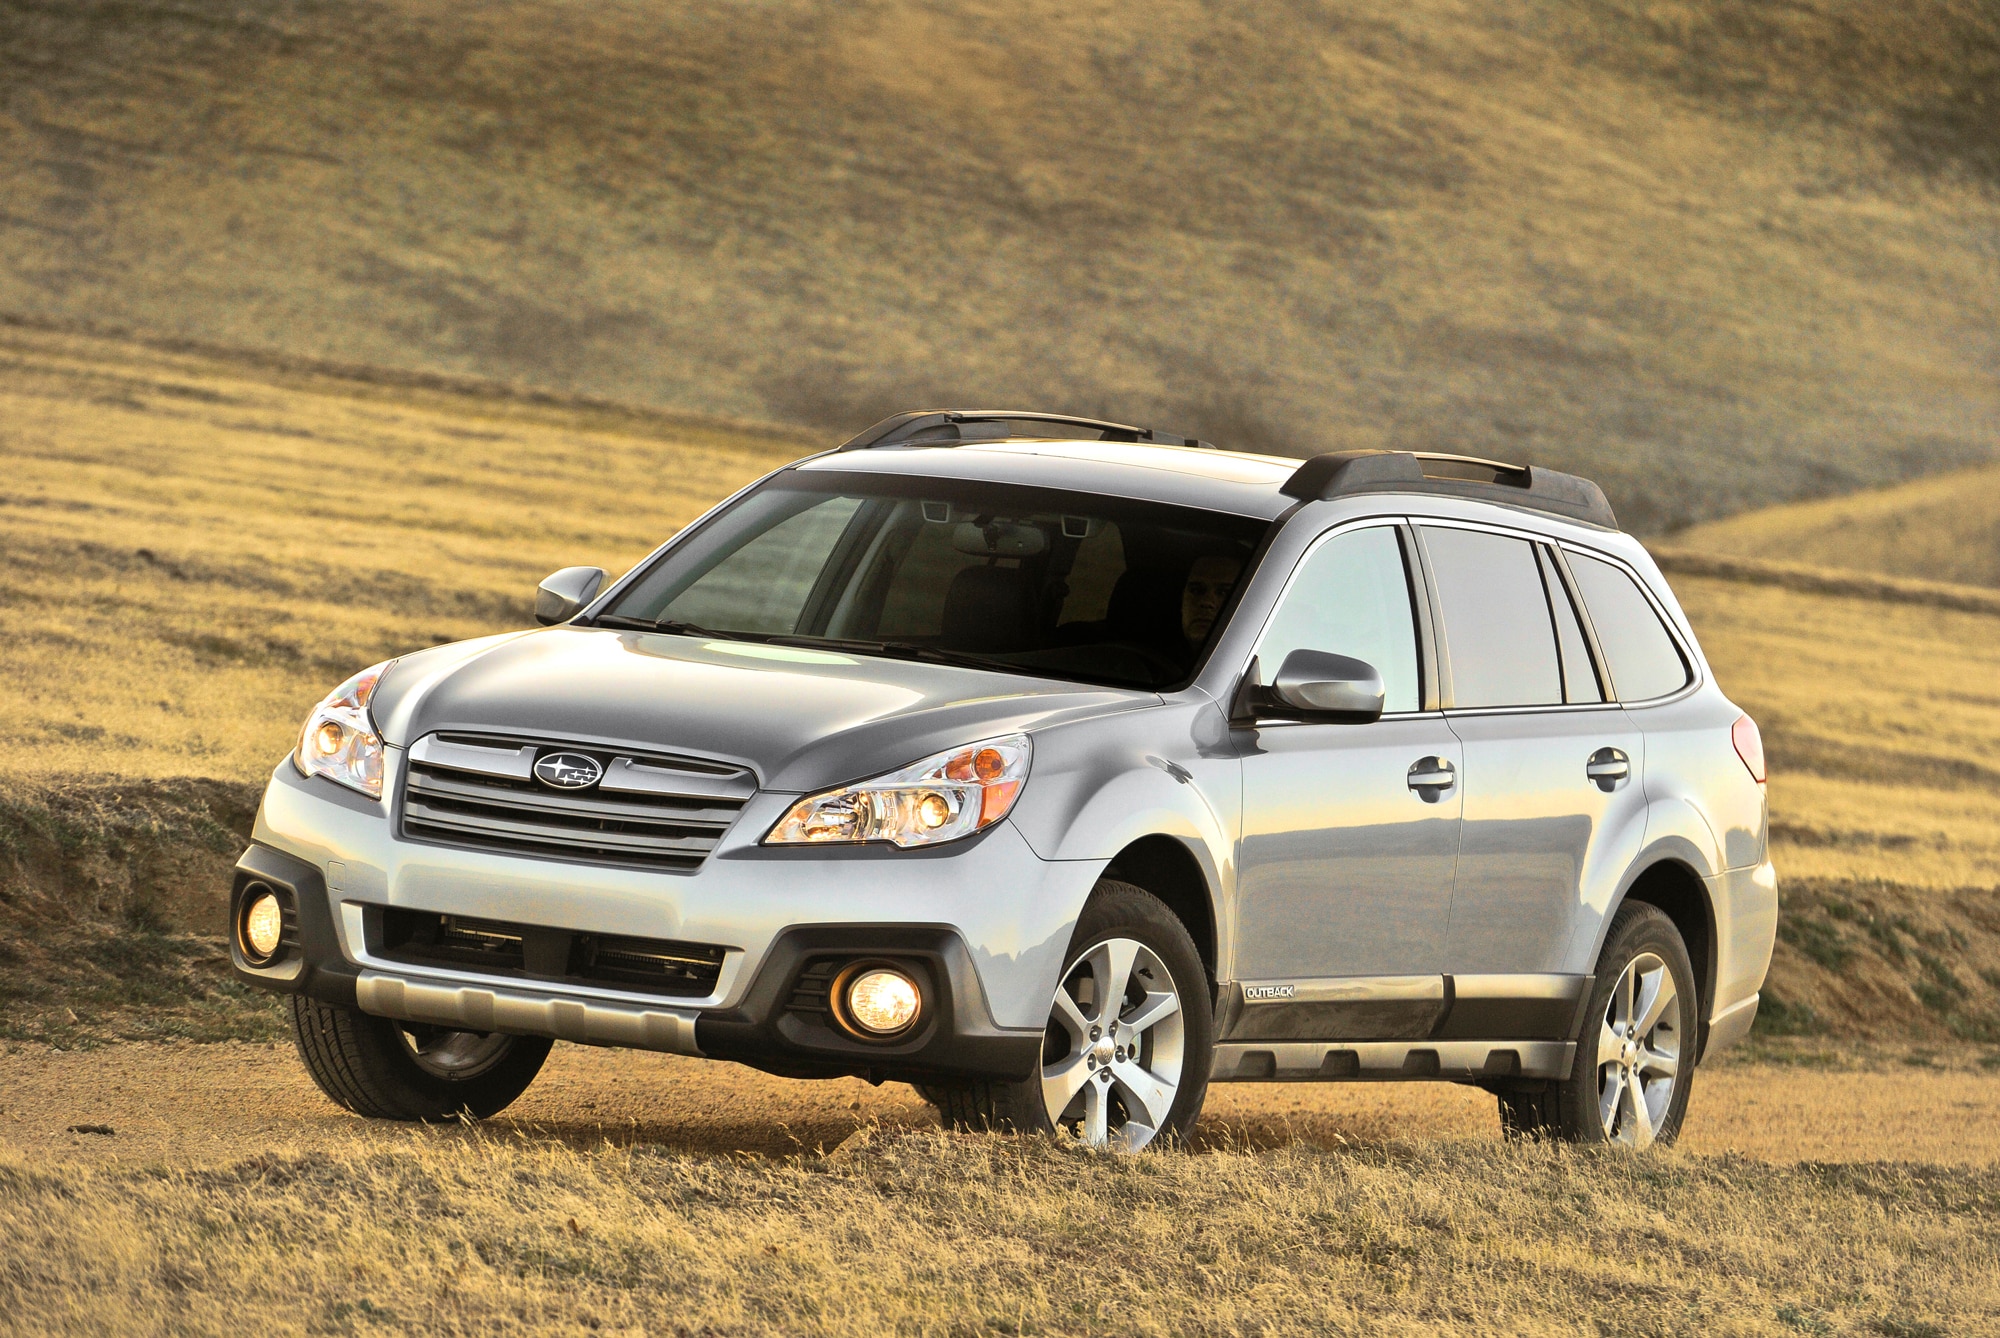 Gray 2012 Subaru Outback parked in mountain fields